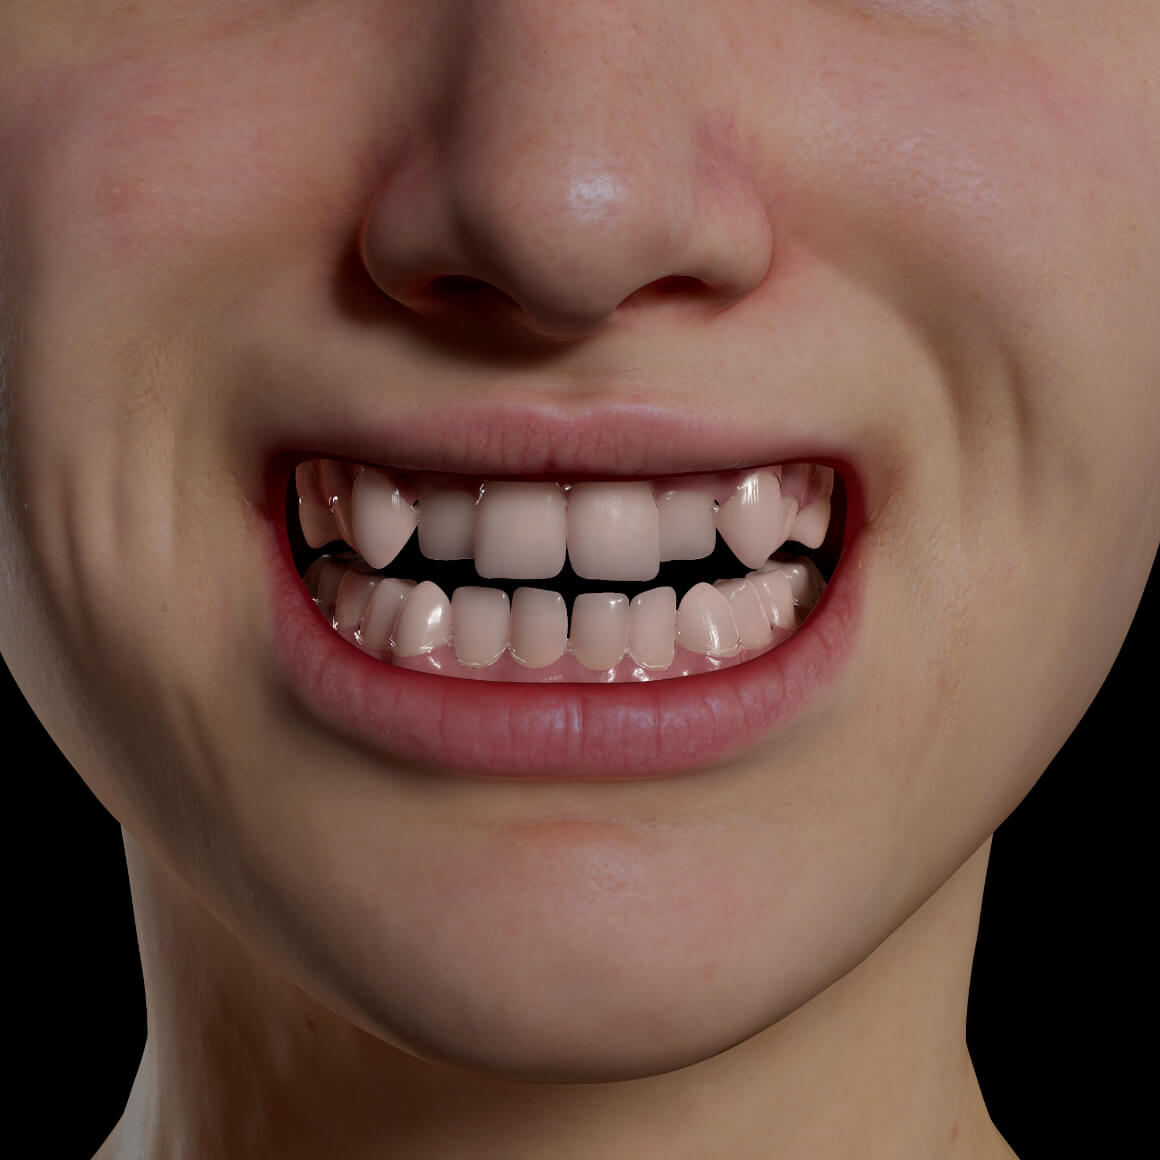 Smile of a Clinique Chloé patient positioned face-on showing crooked and misaligned teeth